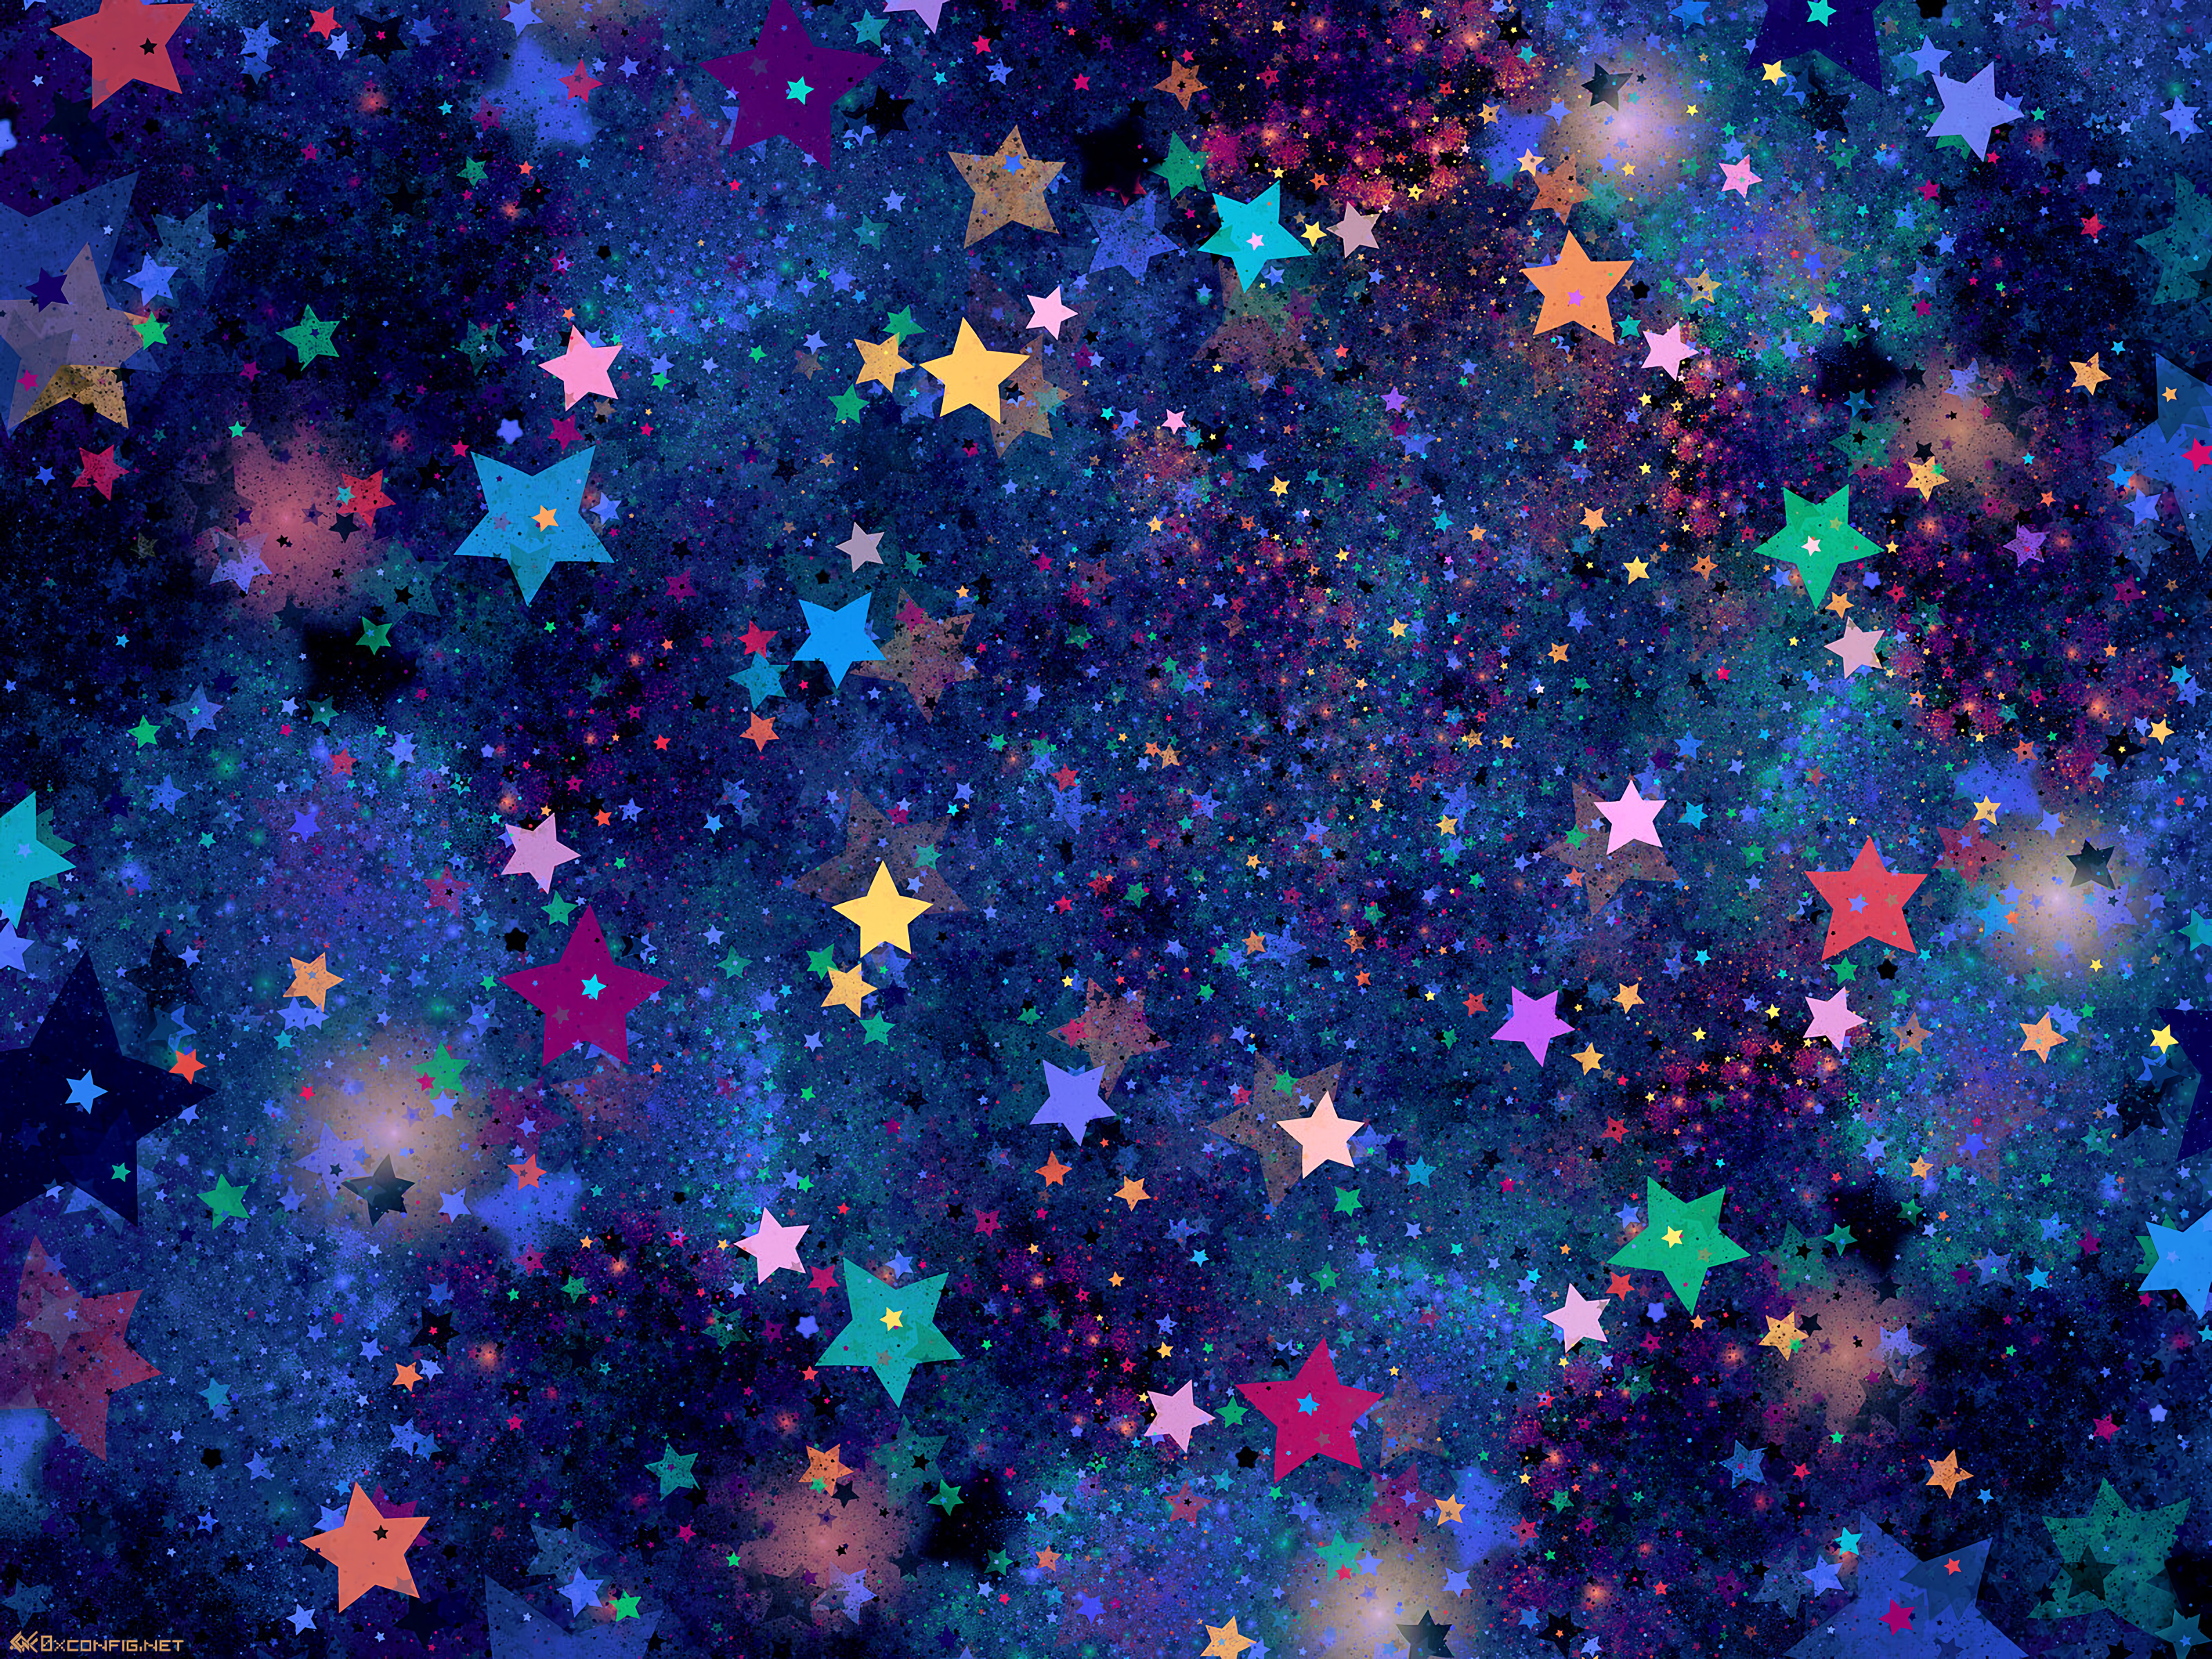 133341 download wallpaper texture, textures, art, stars, pattern, figure screensavers and pictures for free